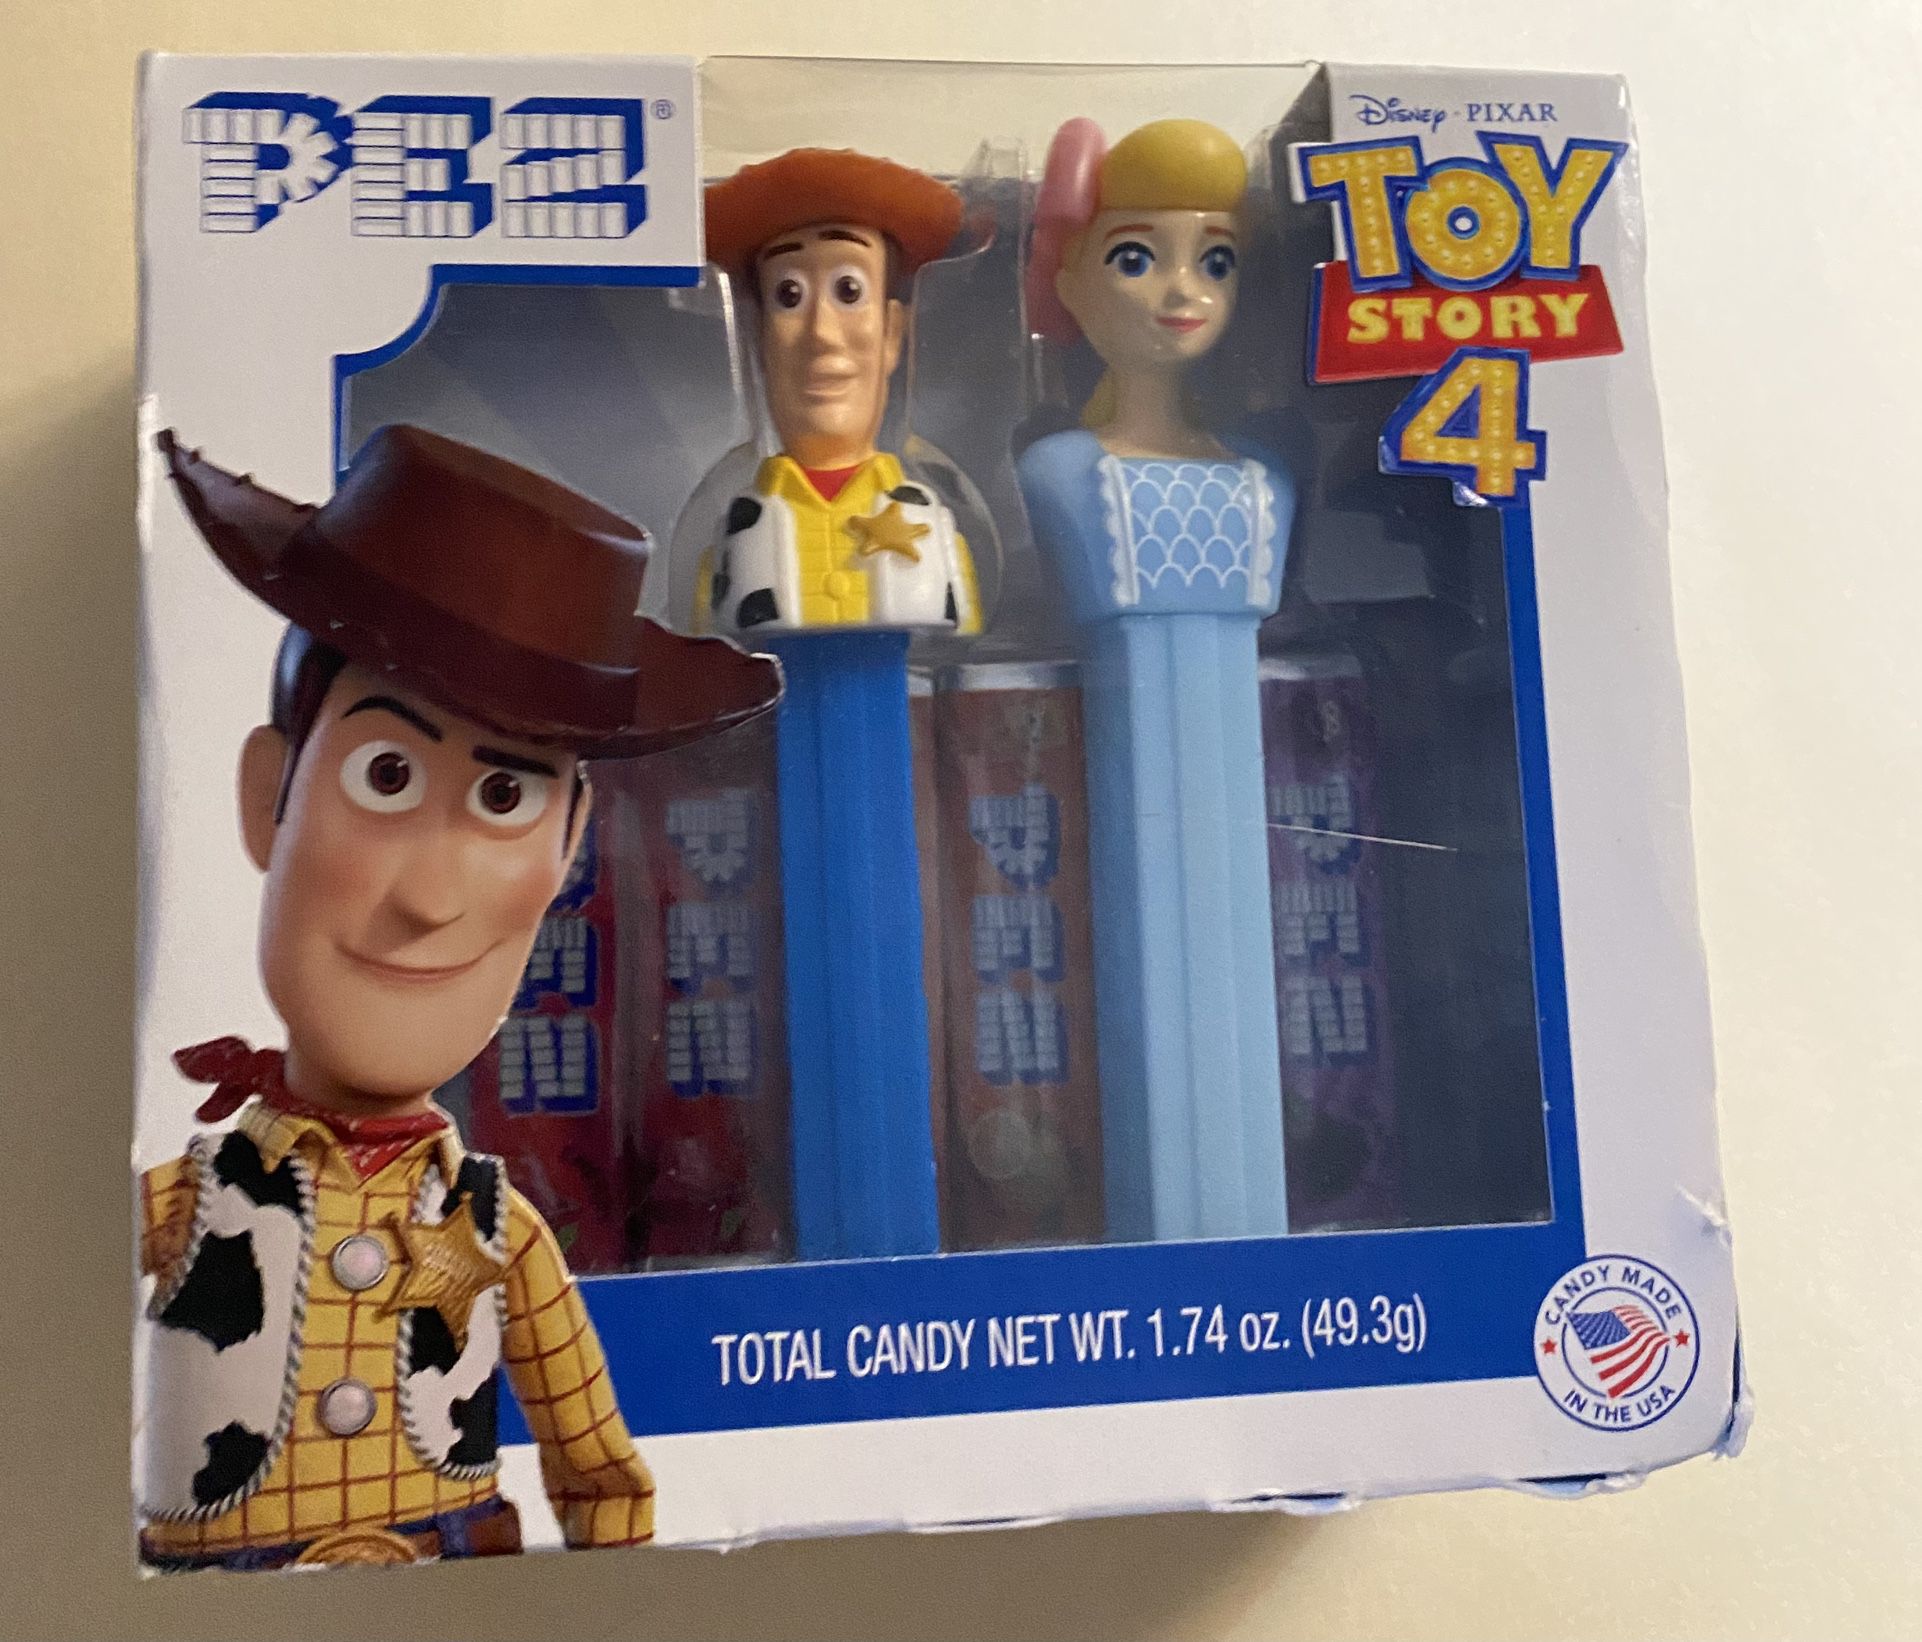 PEZ Disney Toy Story 4 Gift Set Woody & Bo Peep, New In Box with Pez Candy !!